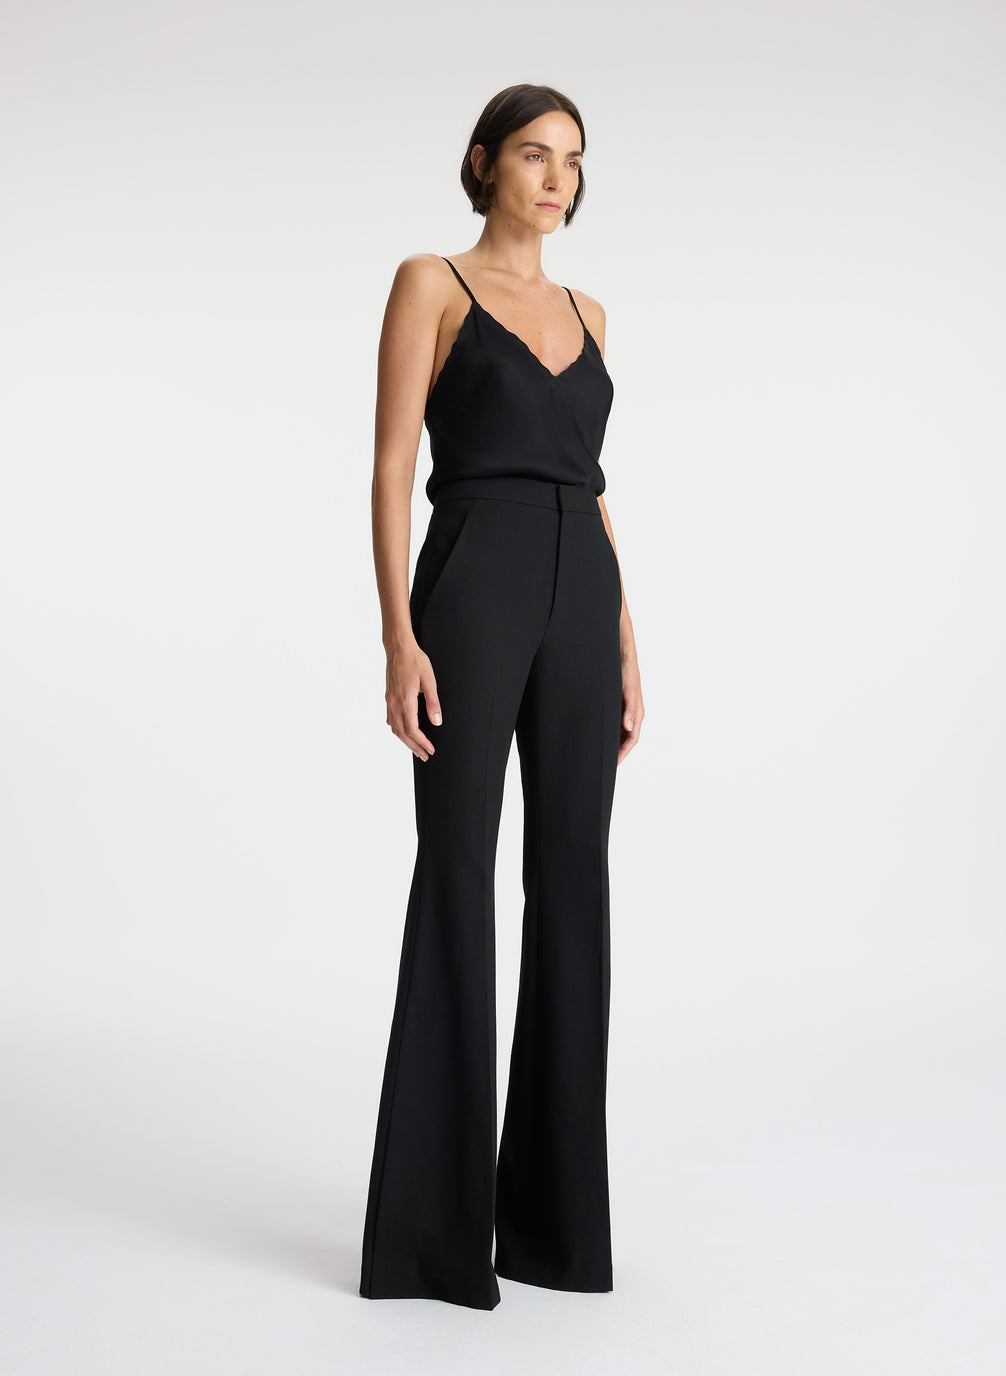 side view of woman wearing black camisole top and black flared pants